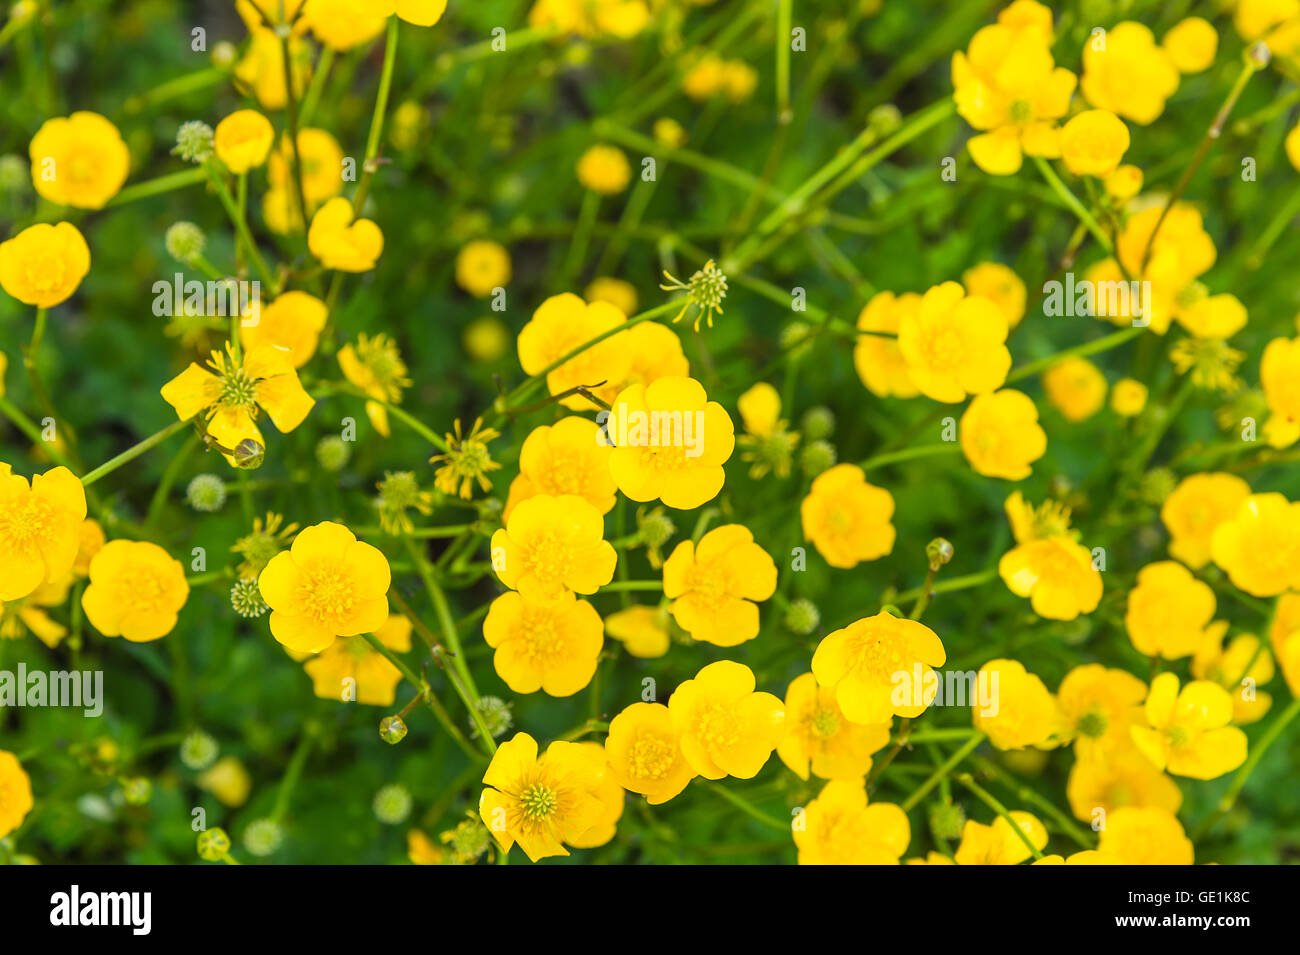 Lawn of the buttercup flower, top view Stock Photo